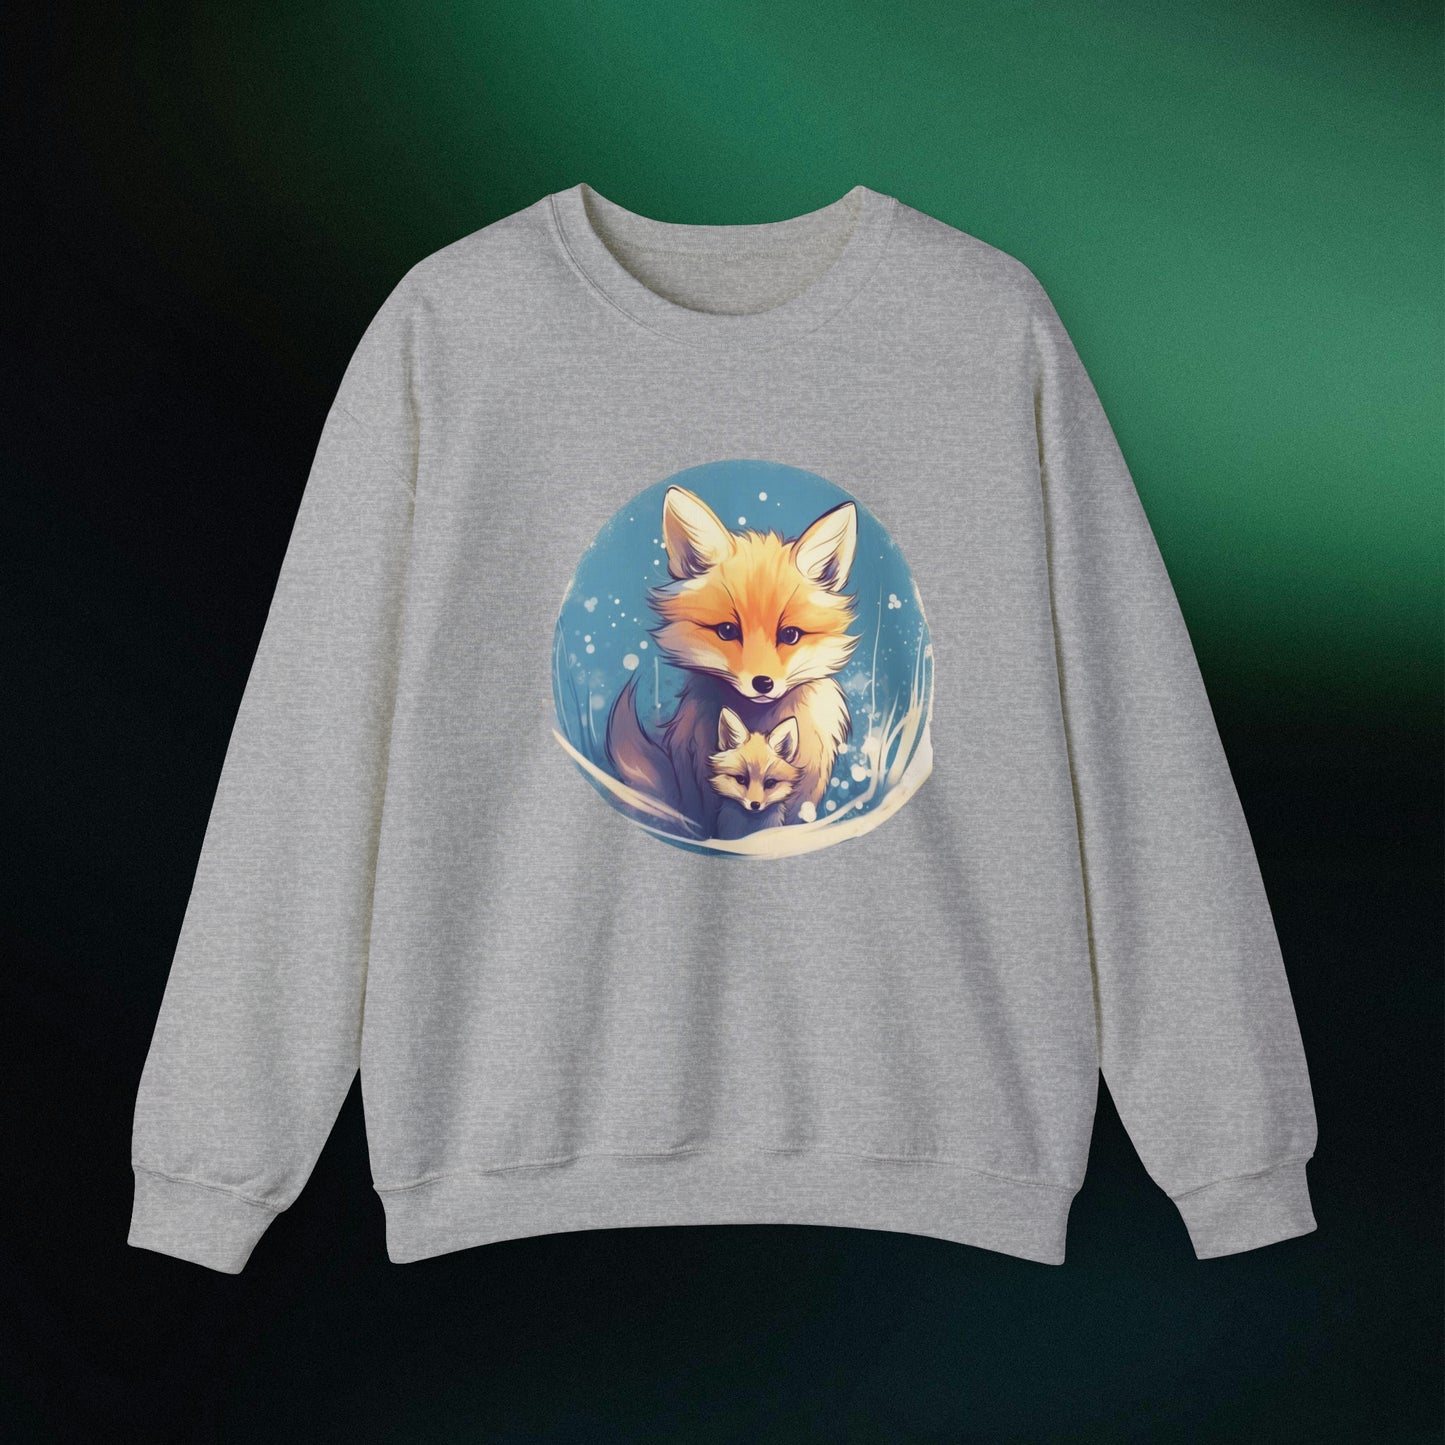 Vintage Forest Witch Aesthetic Sweatshirt - Cozy Fox Cottagecore Sweater with Mommy and Baby Fox Design Sweatshirt S Sport Grey 